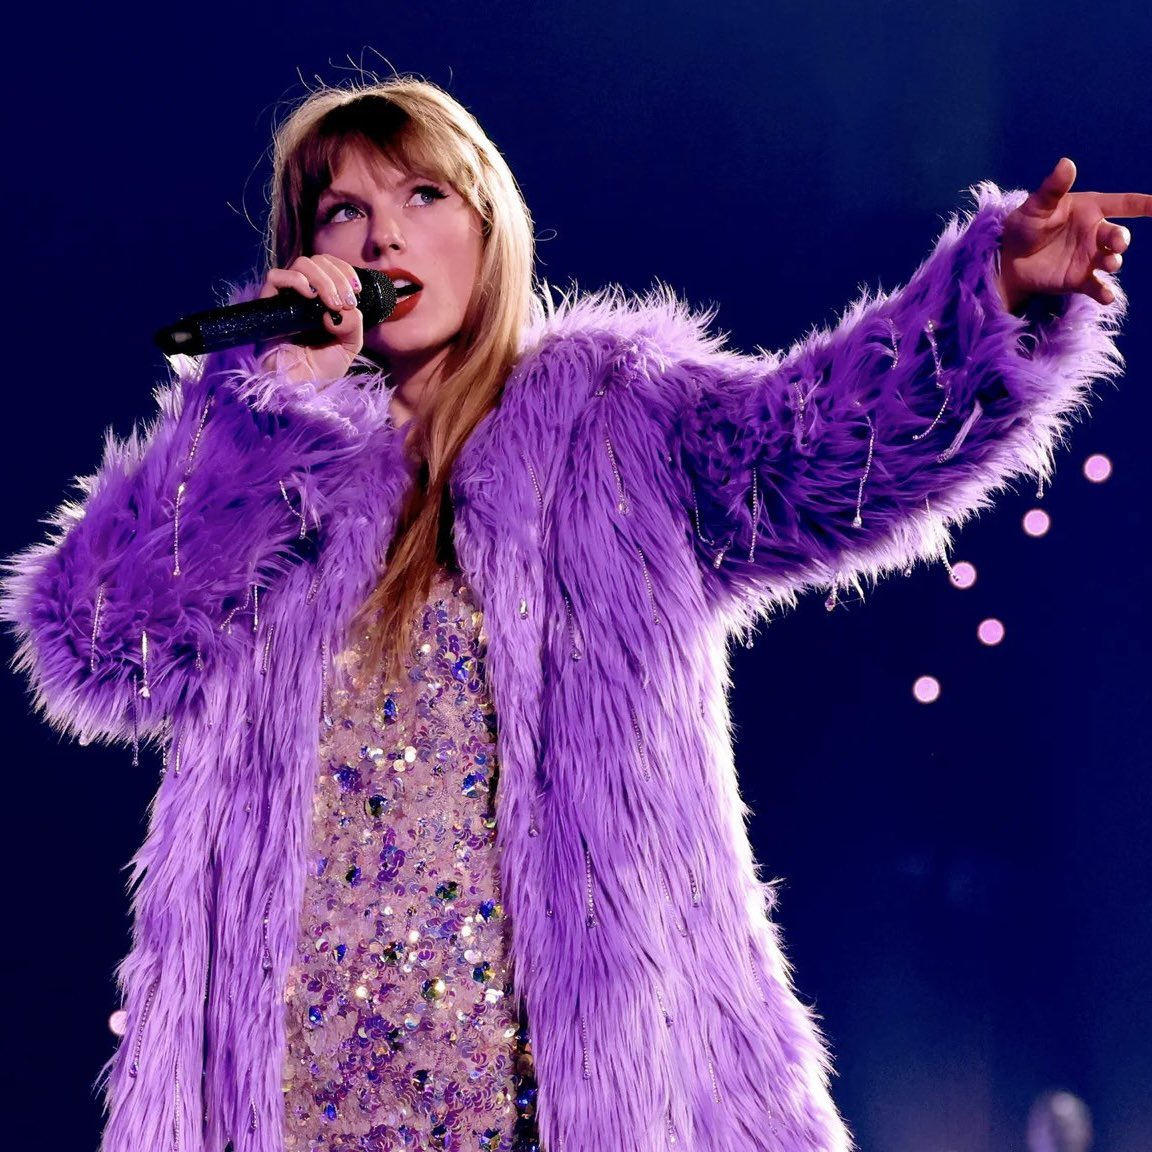 Homeless people are being sent away from Edinburgh in order to make room for tourists from Taylor Swift’s ‘Eras Tour,’ @BBCNews reports. The Edinburgh City Council are working with affected individuals to find “appropriate, alternative accommodation.”